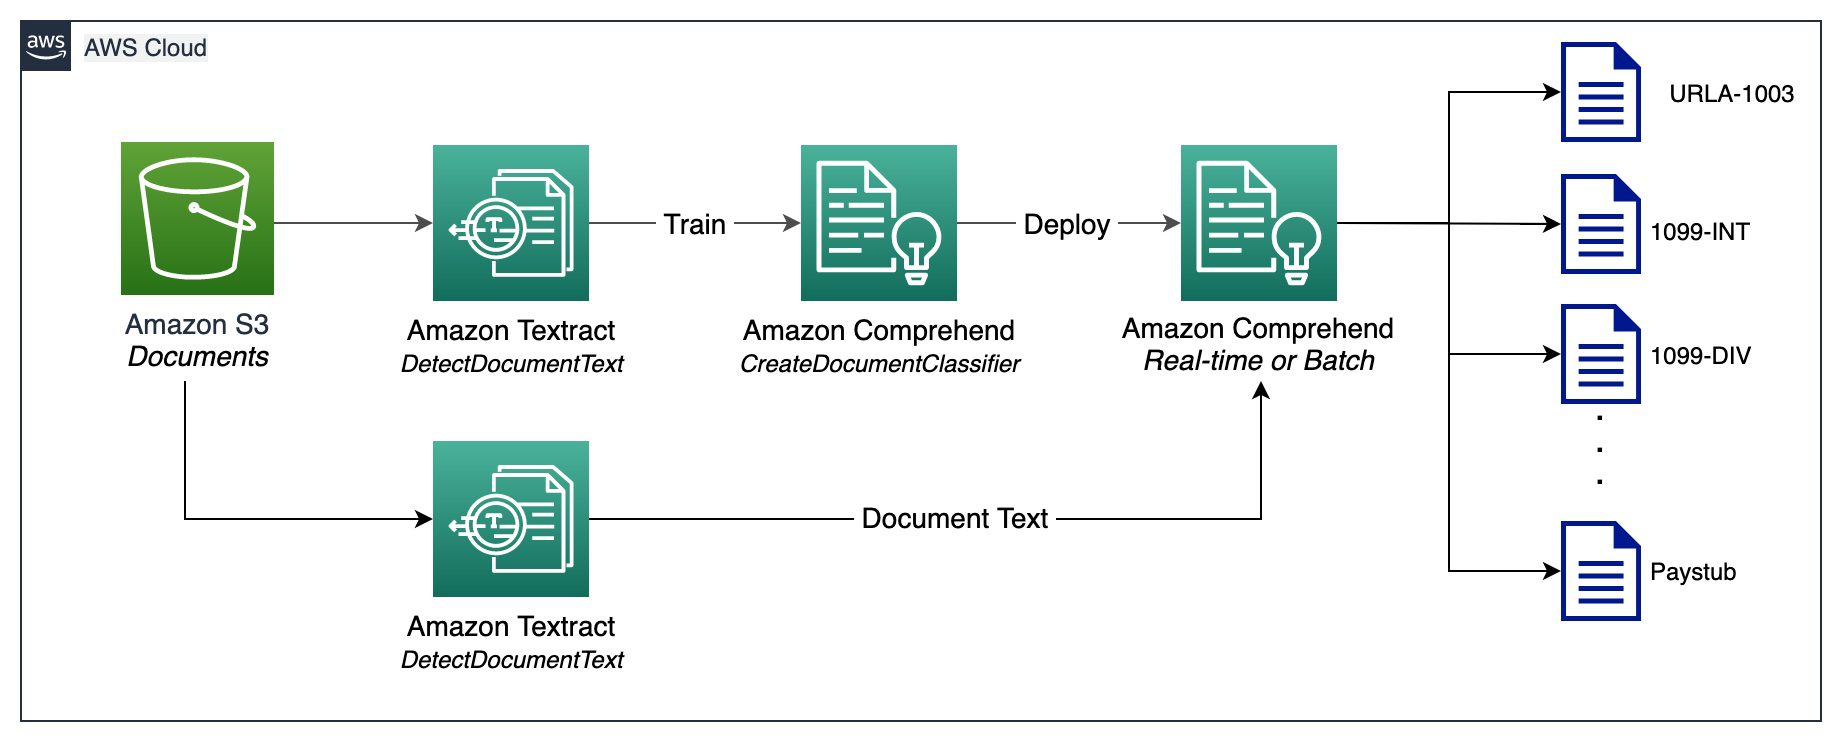 Image shows Amazon Comprehend custom classifier training process and document classification using the trained and deployed classifier model (real time or batch).